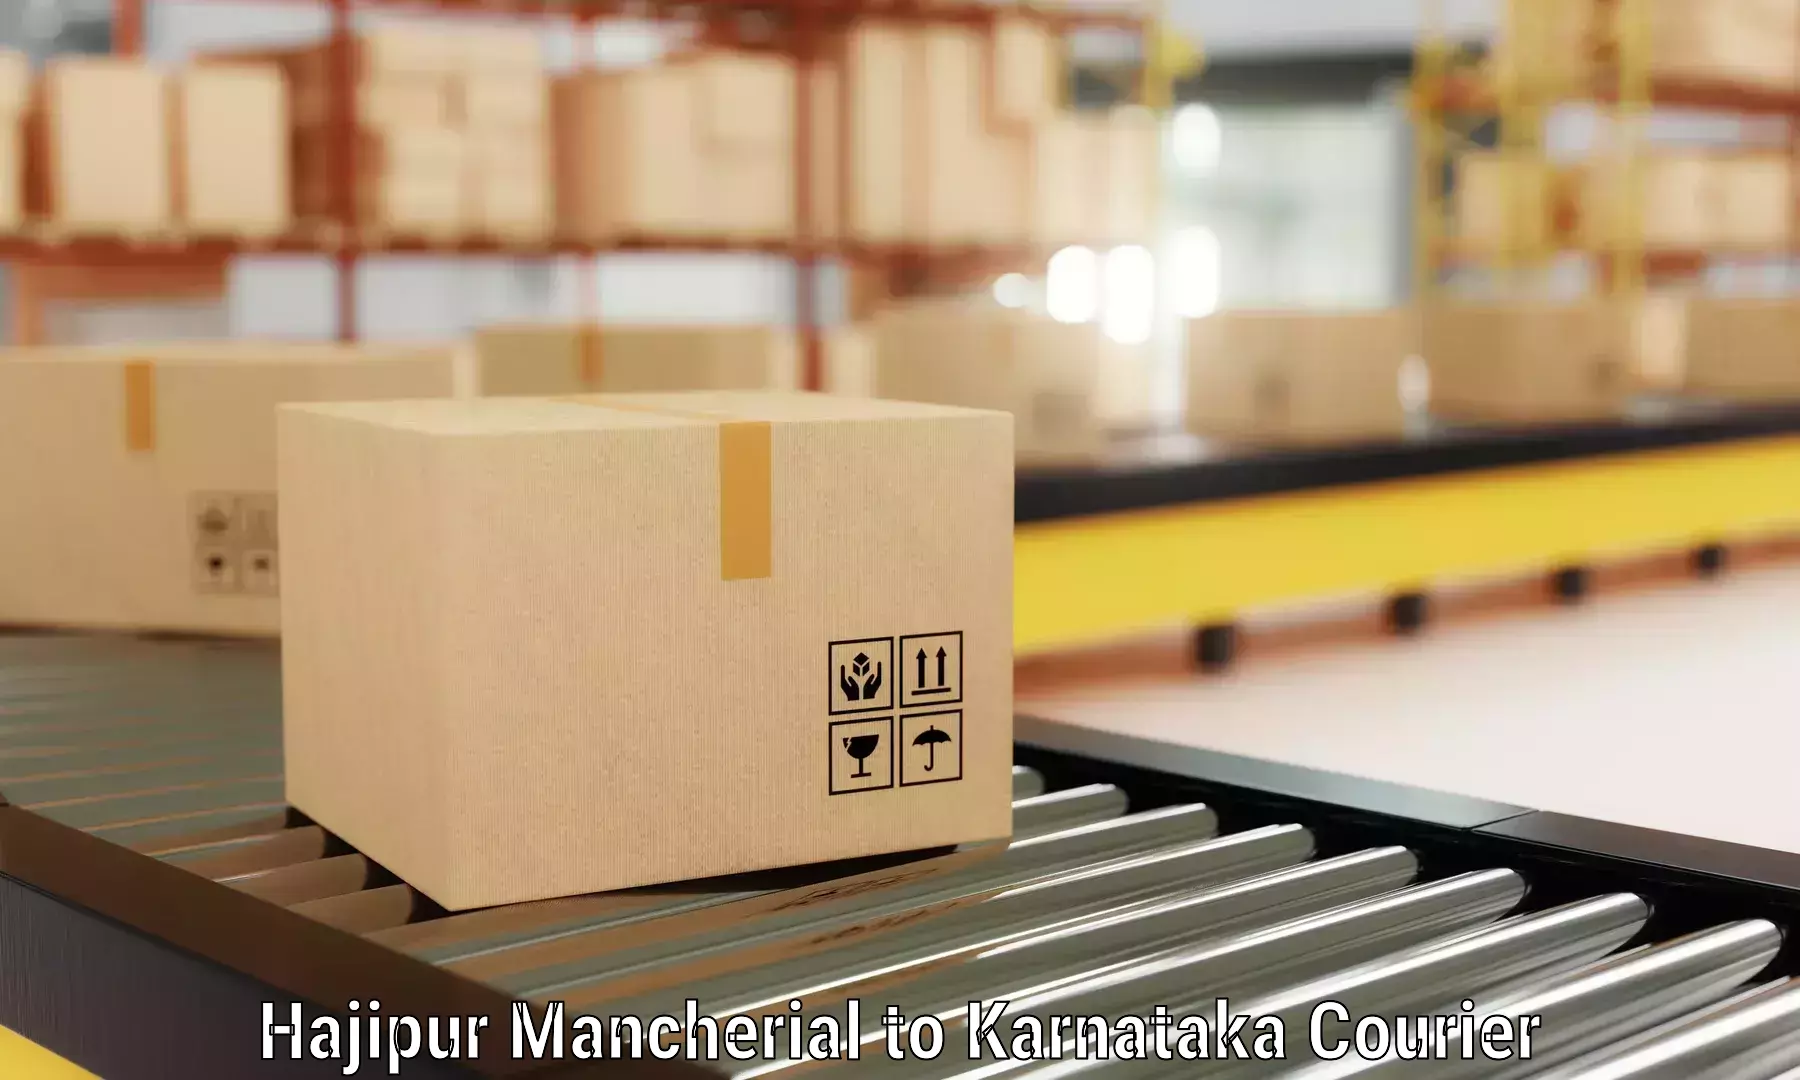 Efficient relocation services Hajipur Mancherial to Ullal